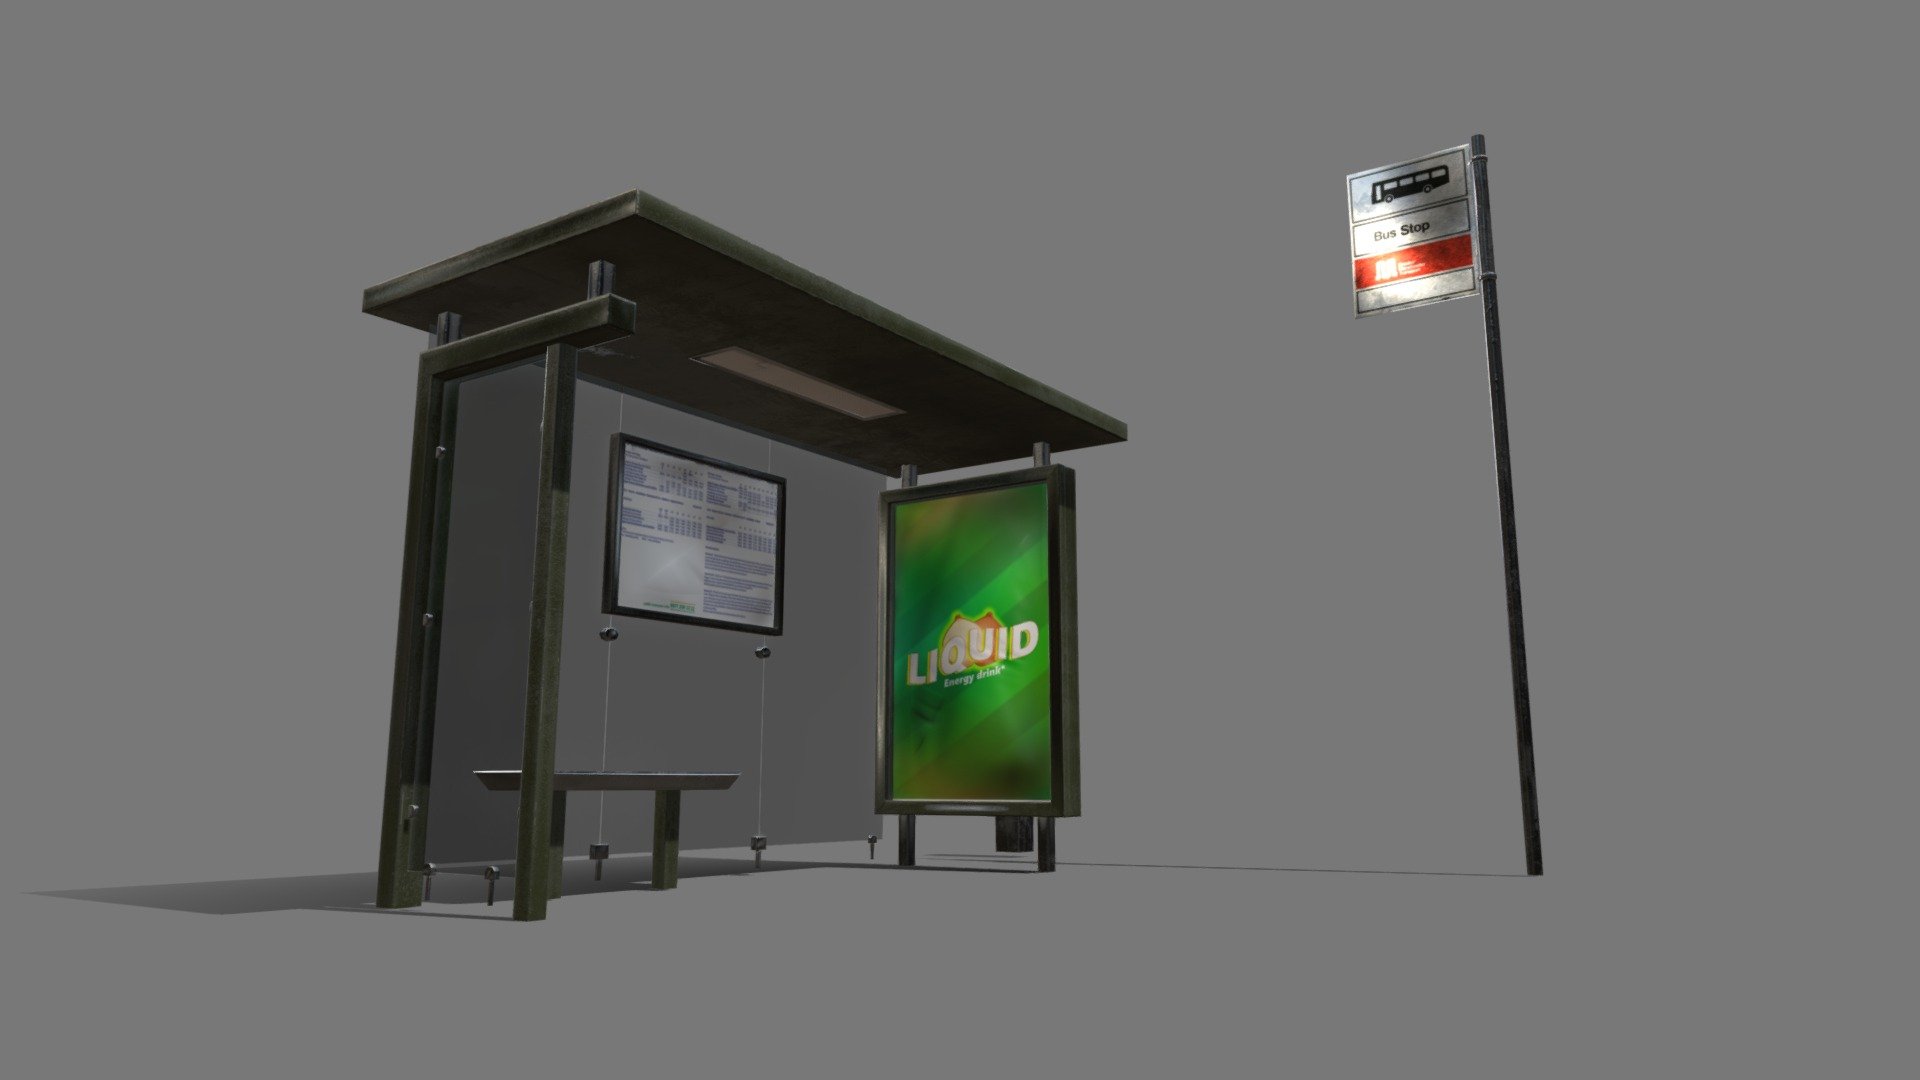 Low poly bus stop.

Textures are 4096x4096 for the bus stop and 2048x2048 for the glass.

Also included is the .psd for ease of altering the posters, colours, timetable and bustop as well as the original .blender file 3d model